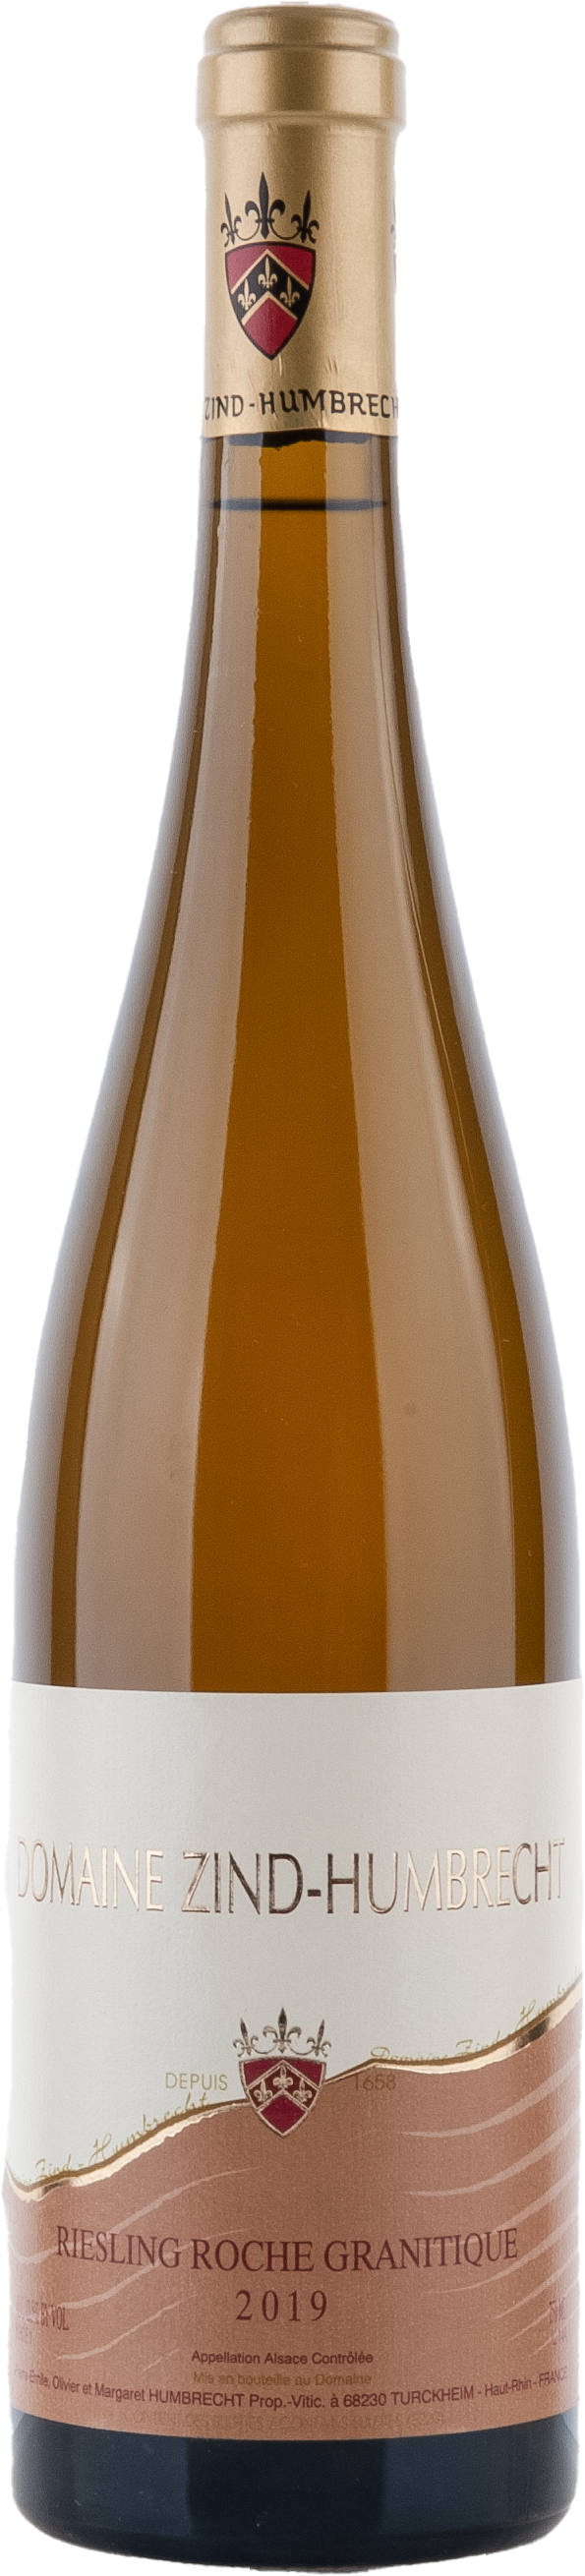 Riesling Roche Granitique